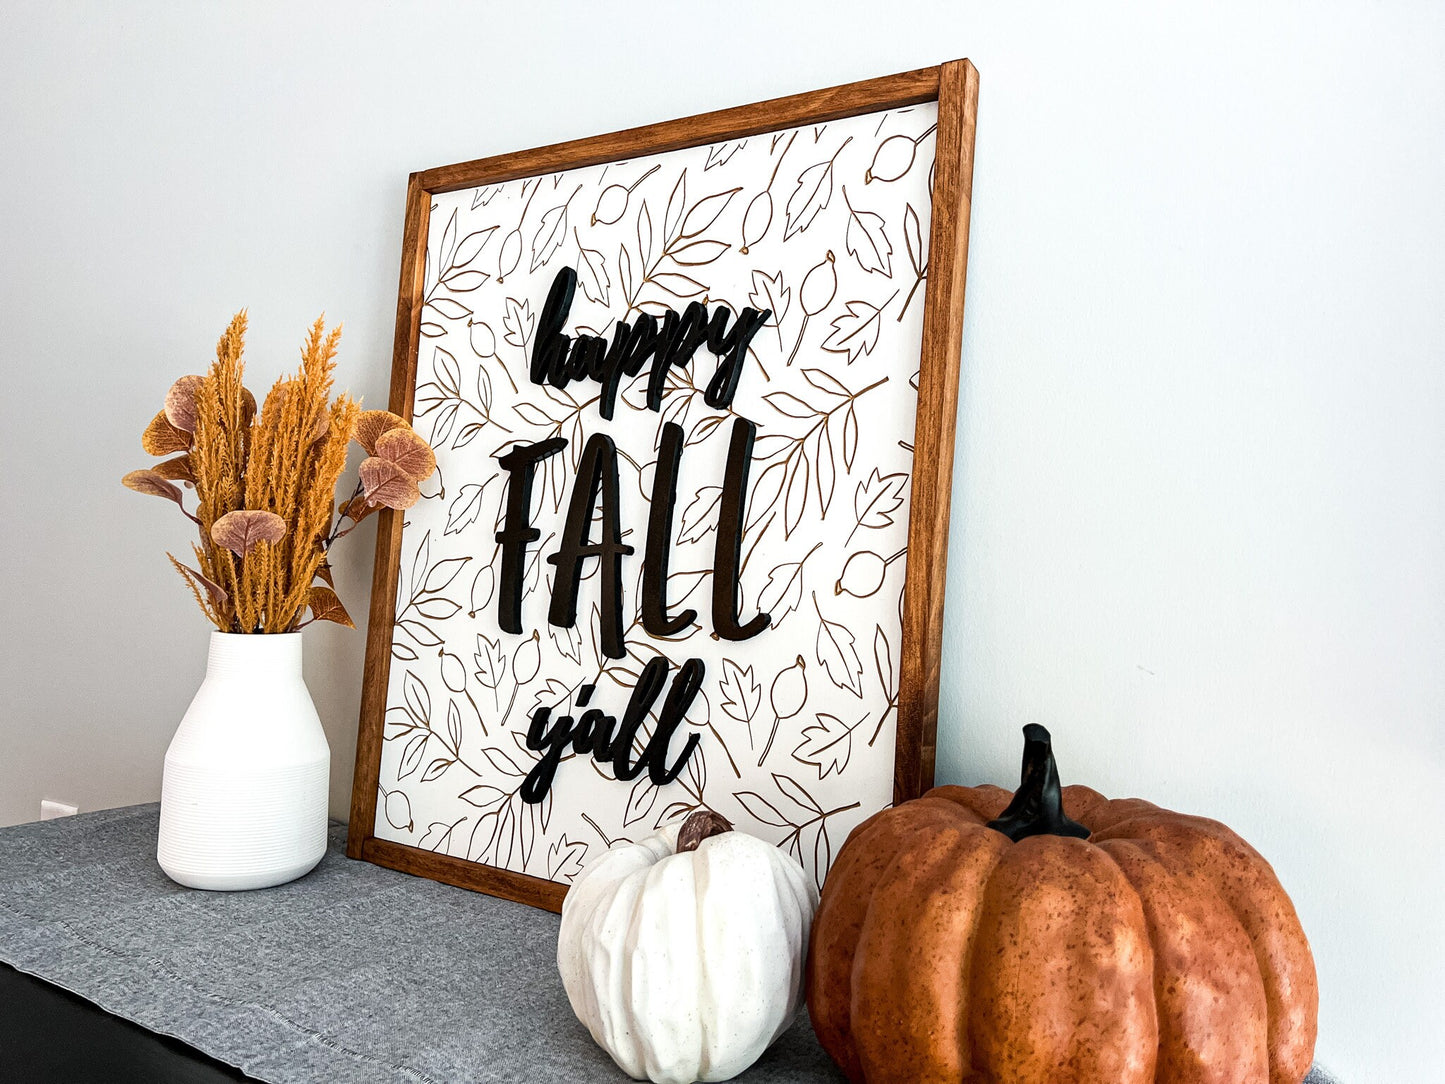 Happy Fall Yall Wood Sign - Fall Wall Art – Autumn Home Decor – Fall Decor – Wall Art – Fall Wood Sign – Autumn Leaves Sign